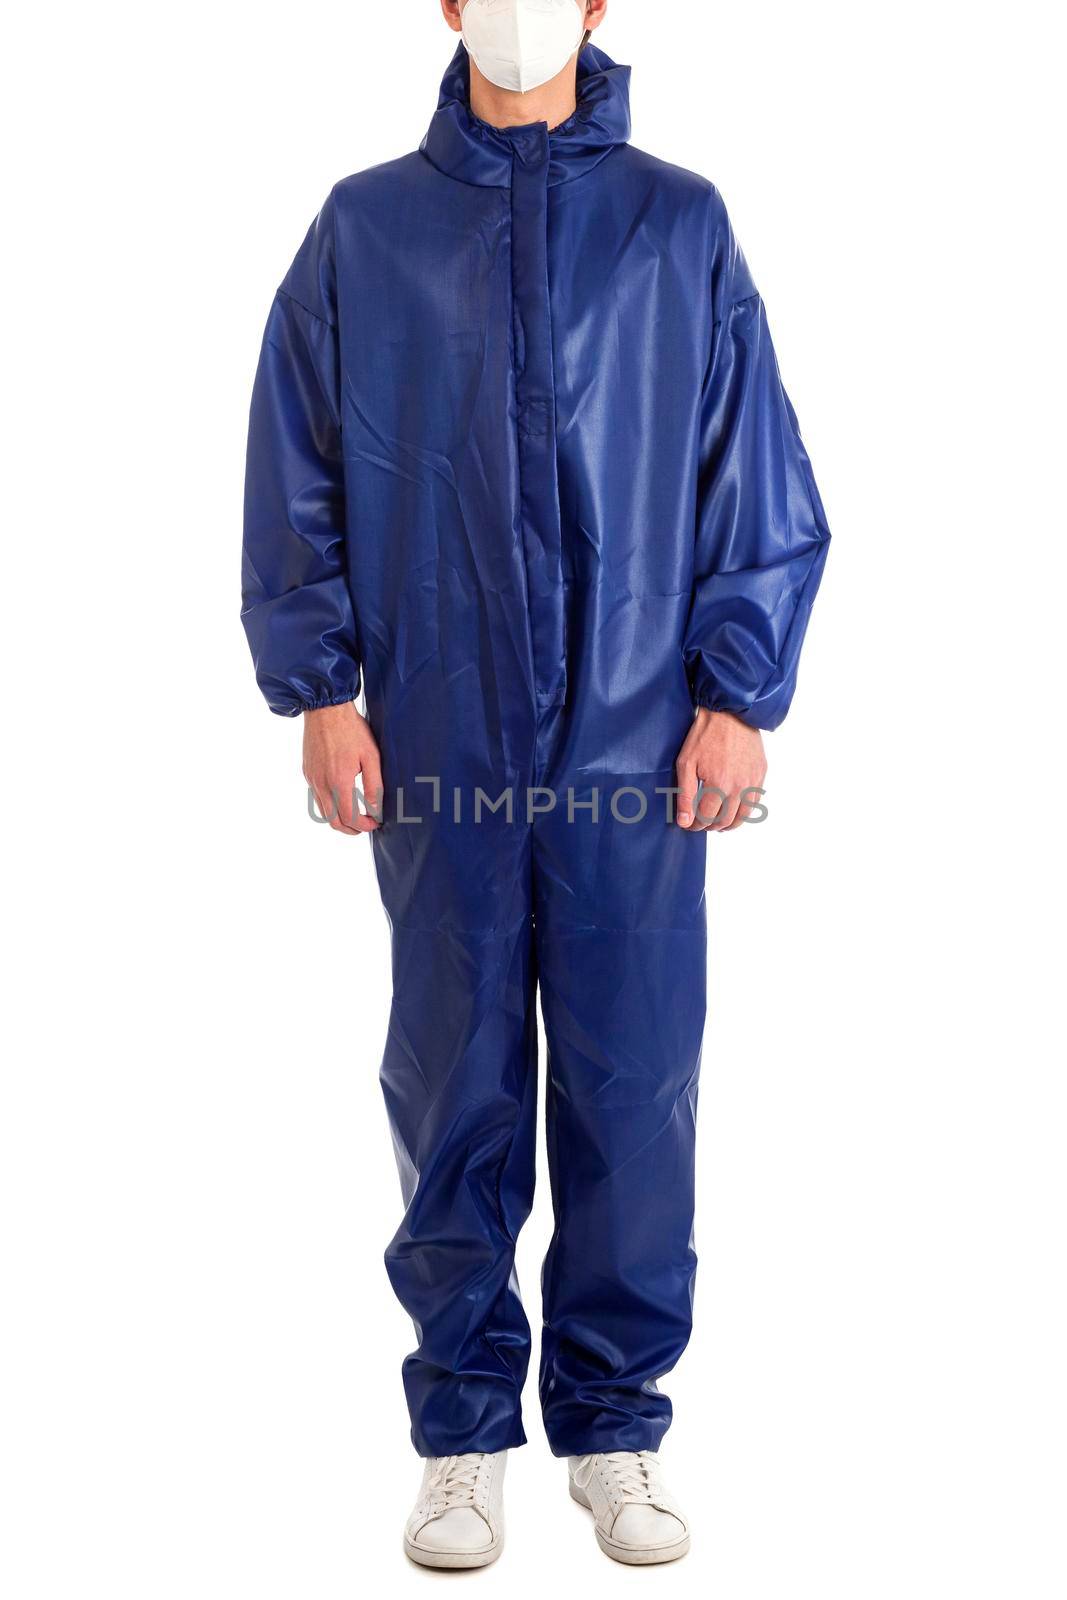 Man wearing blue protective suit and mask isolated on white background